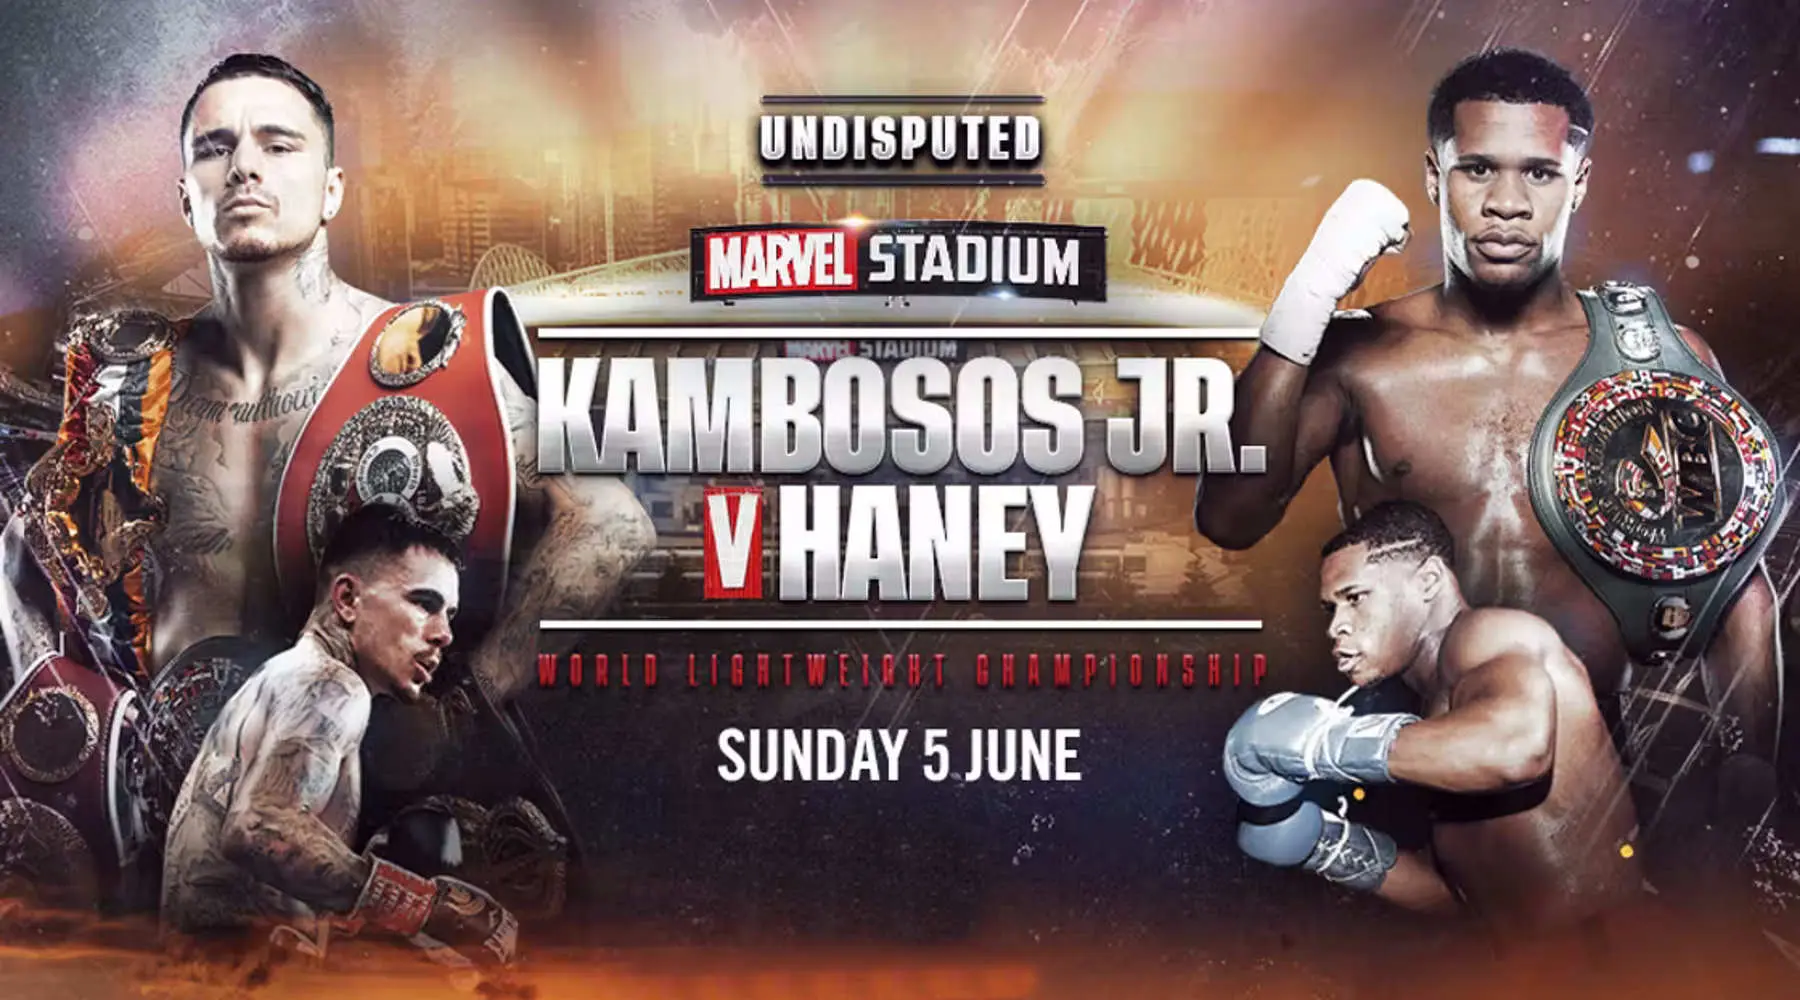 How to watch Kambosos Jr vs Haney boxing live online and start time